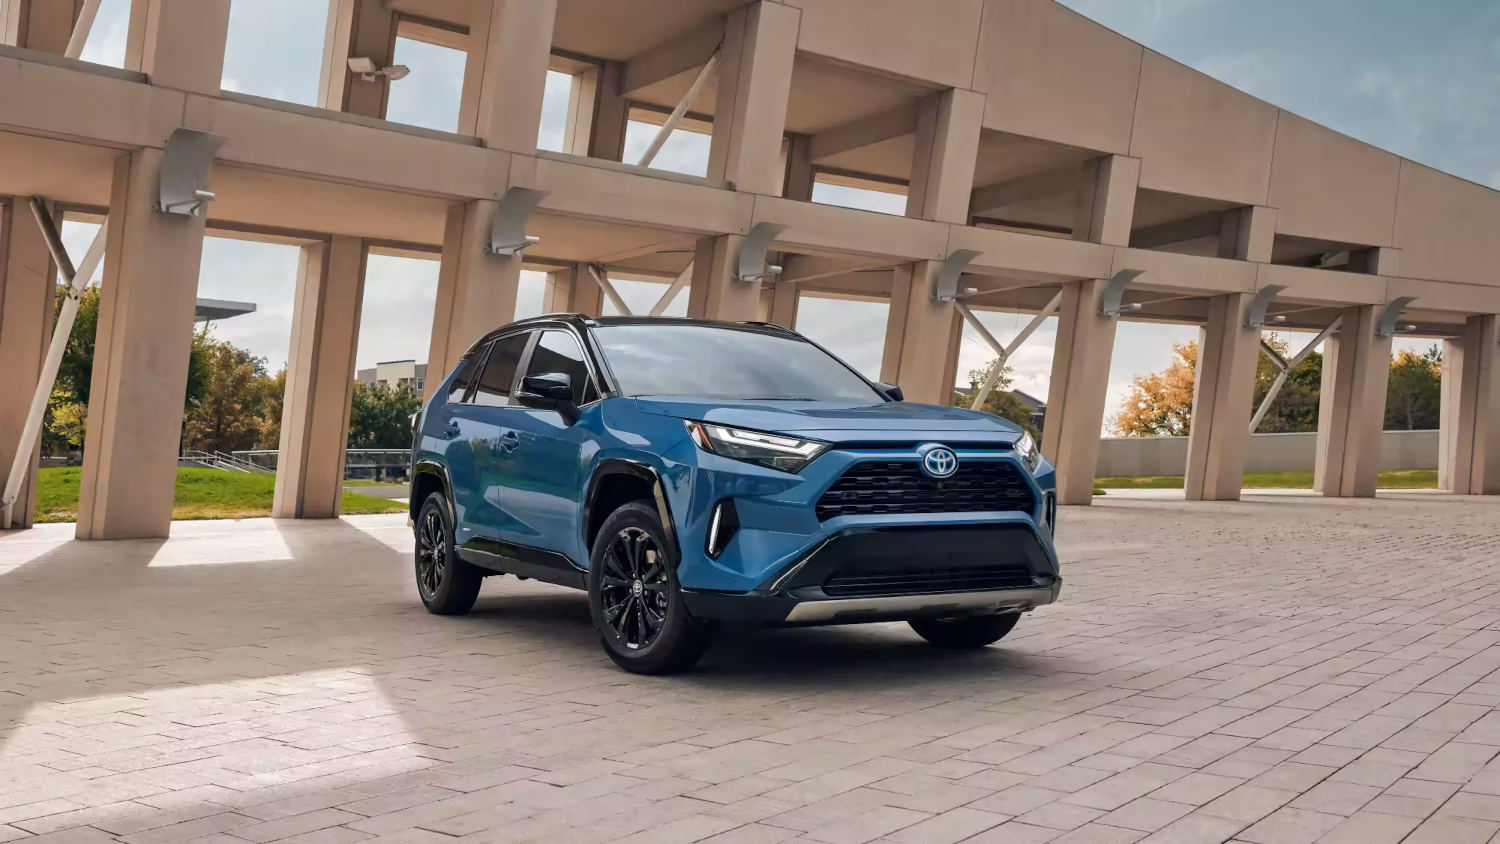 The best small SUVs include this 2023 Toyota RAV4